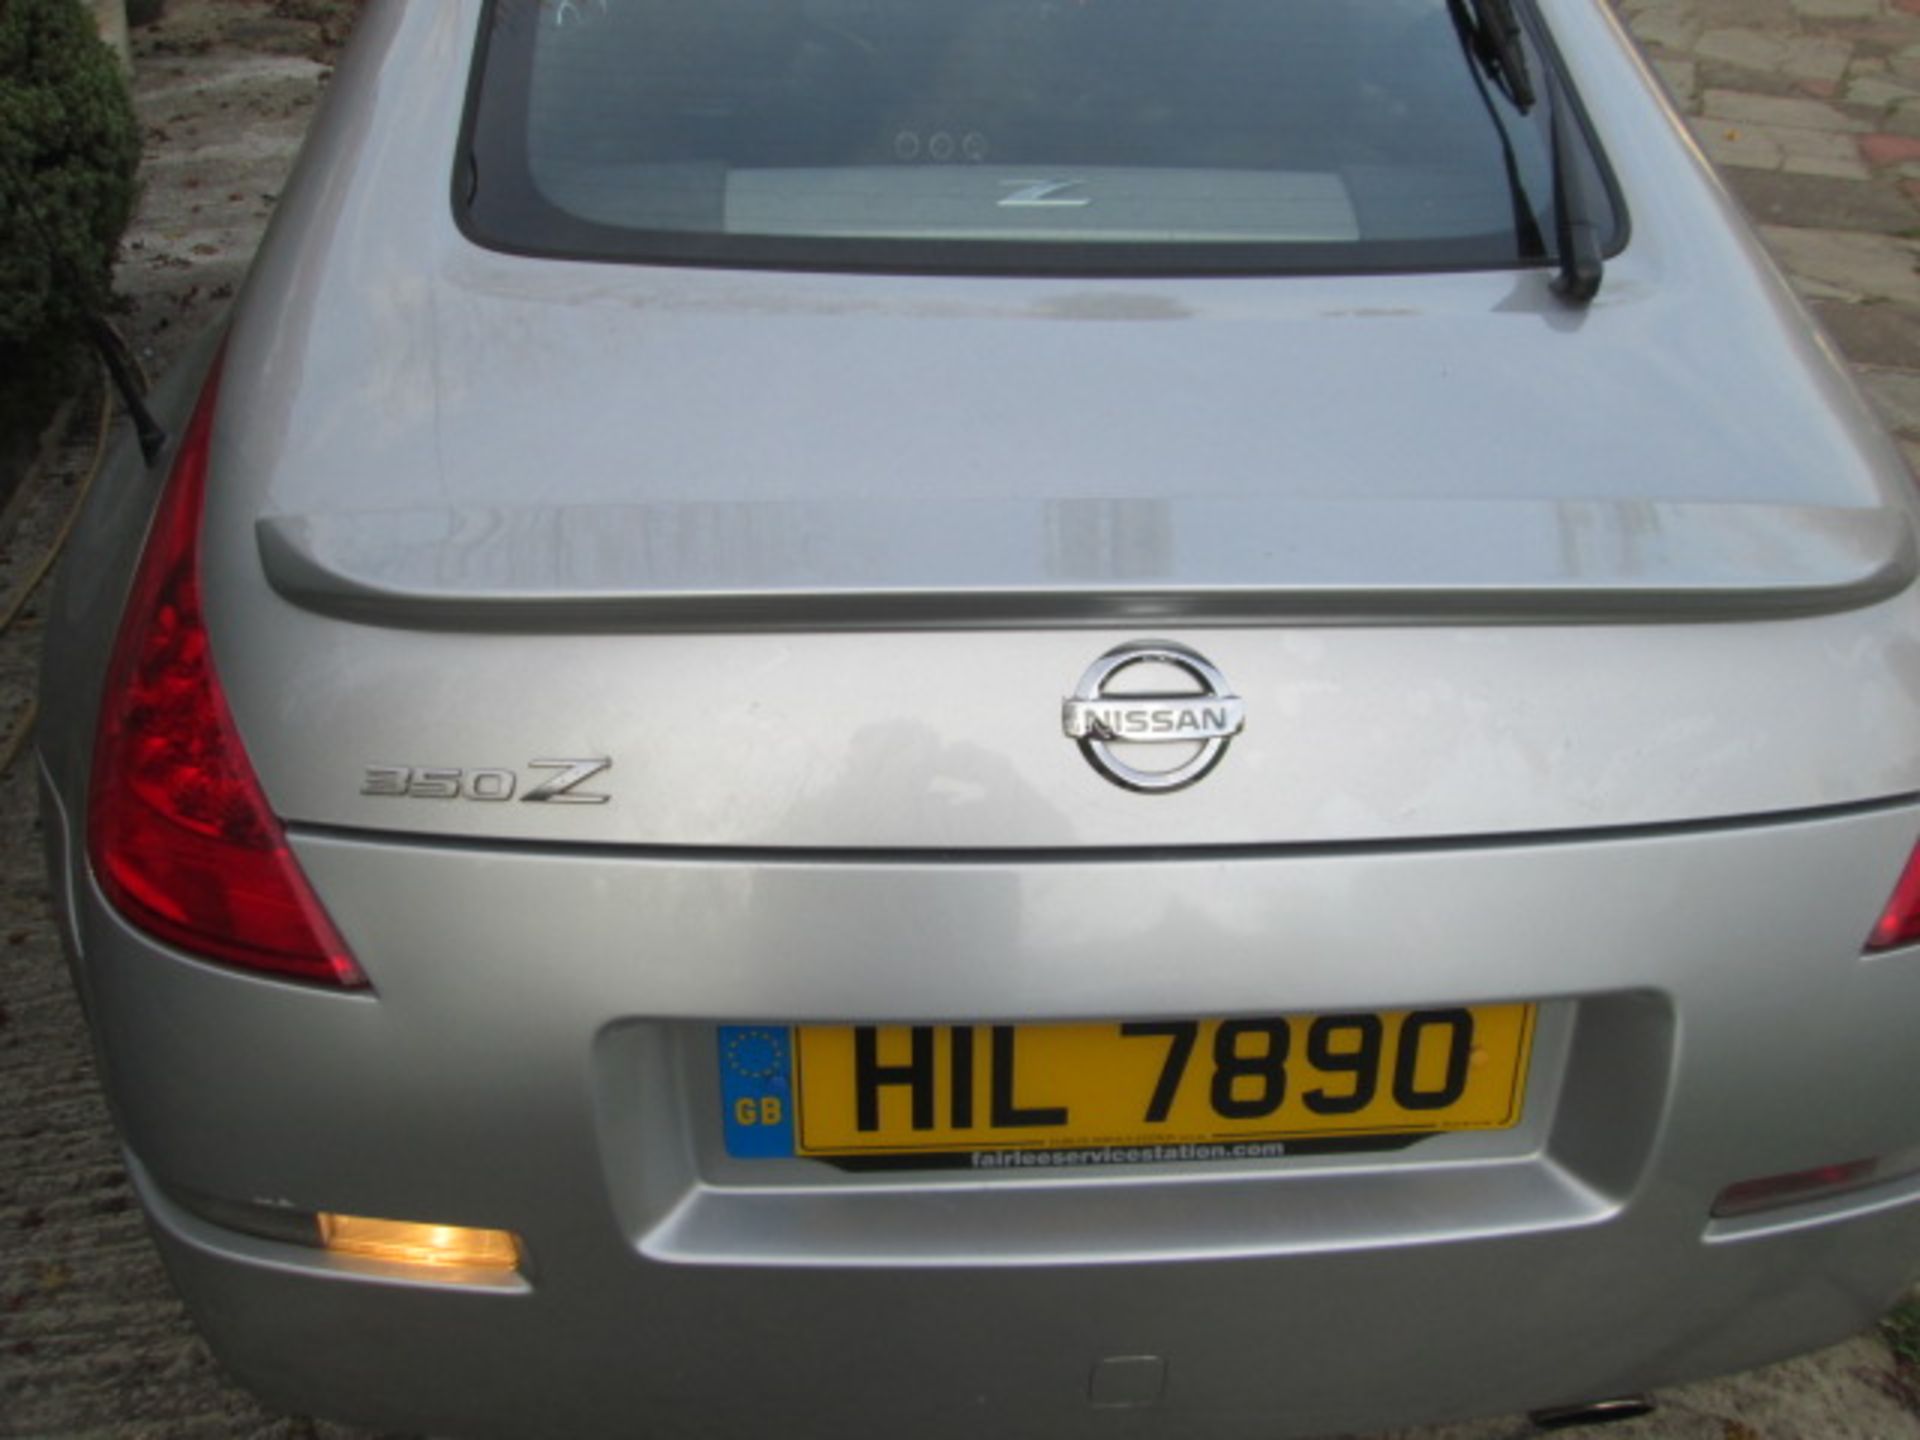 HIL 7890: Nissan 350z in Grey. 3498cc, Petrol, 6 Speed Manual. 2 Previous Owners, First Registered - Image 12 of 38